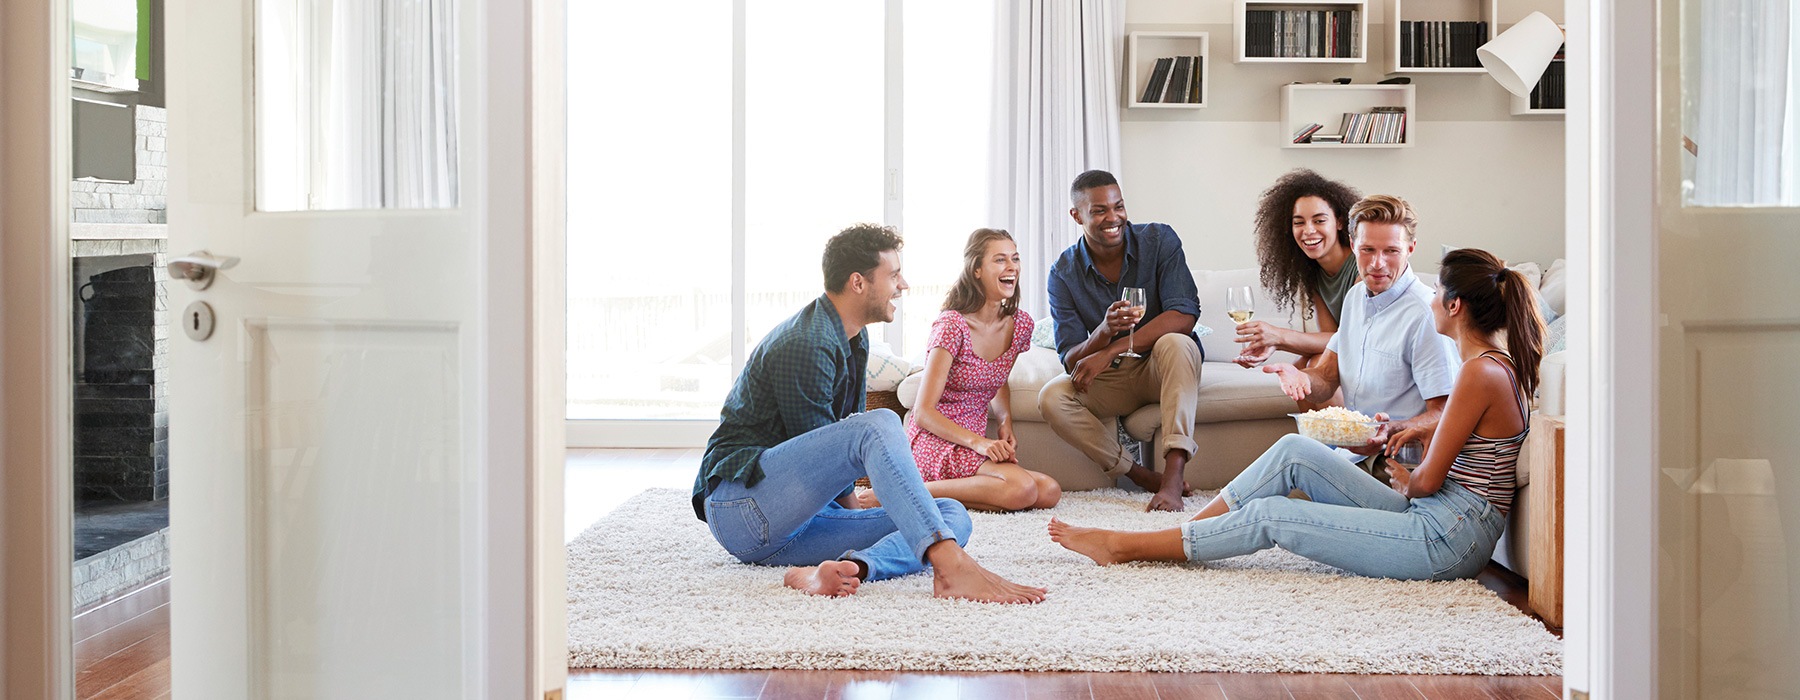 lifestyle image of a group of people laughing and socializing on a living area floor